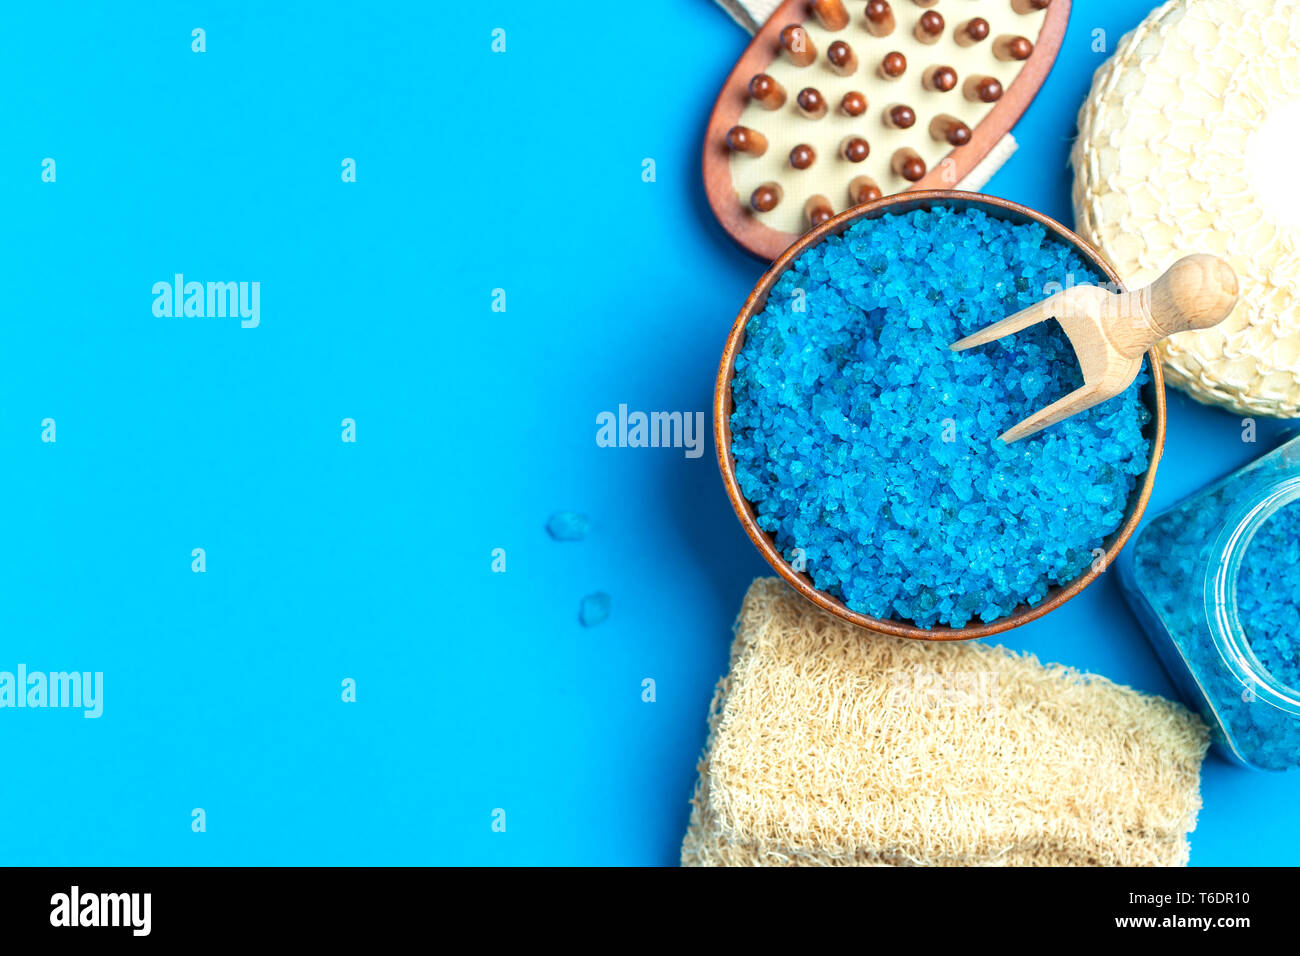 Spa setting with blue salt and sponge and copy space on blue background Stock Photo